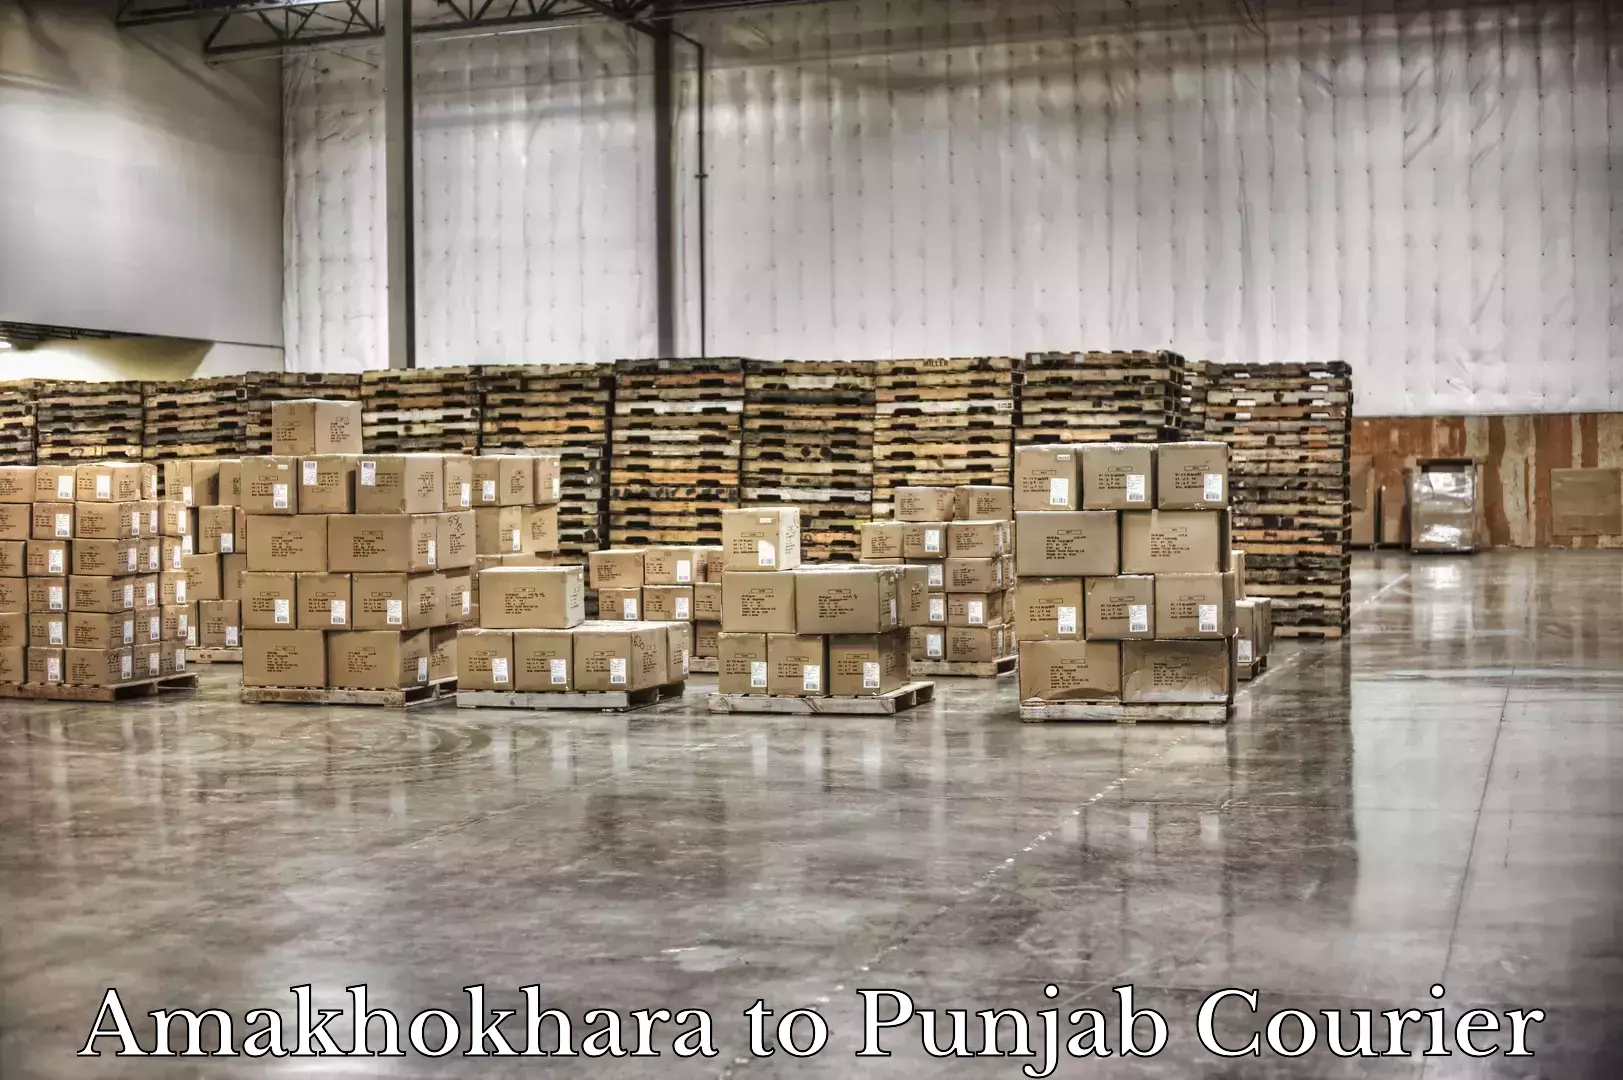 Baggage shipping experience in Amakhokhara to Anandpur Sahib